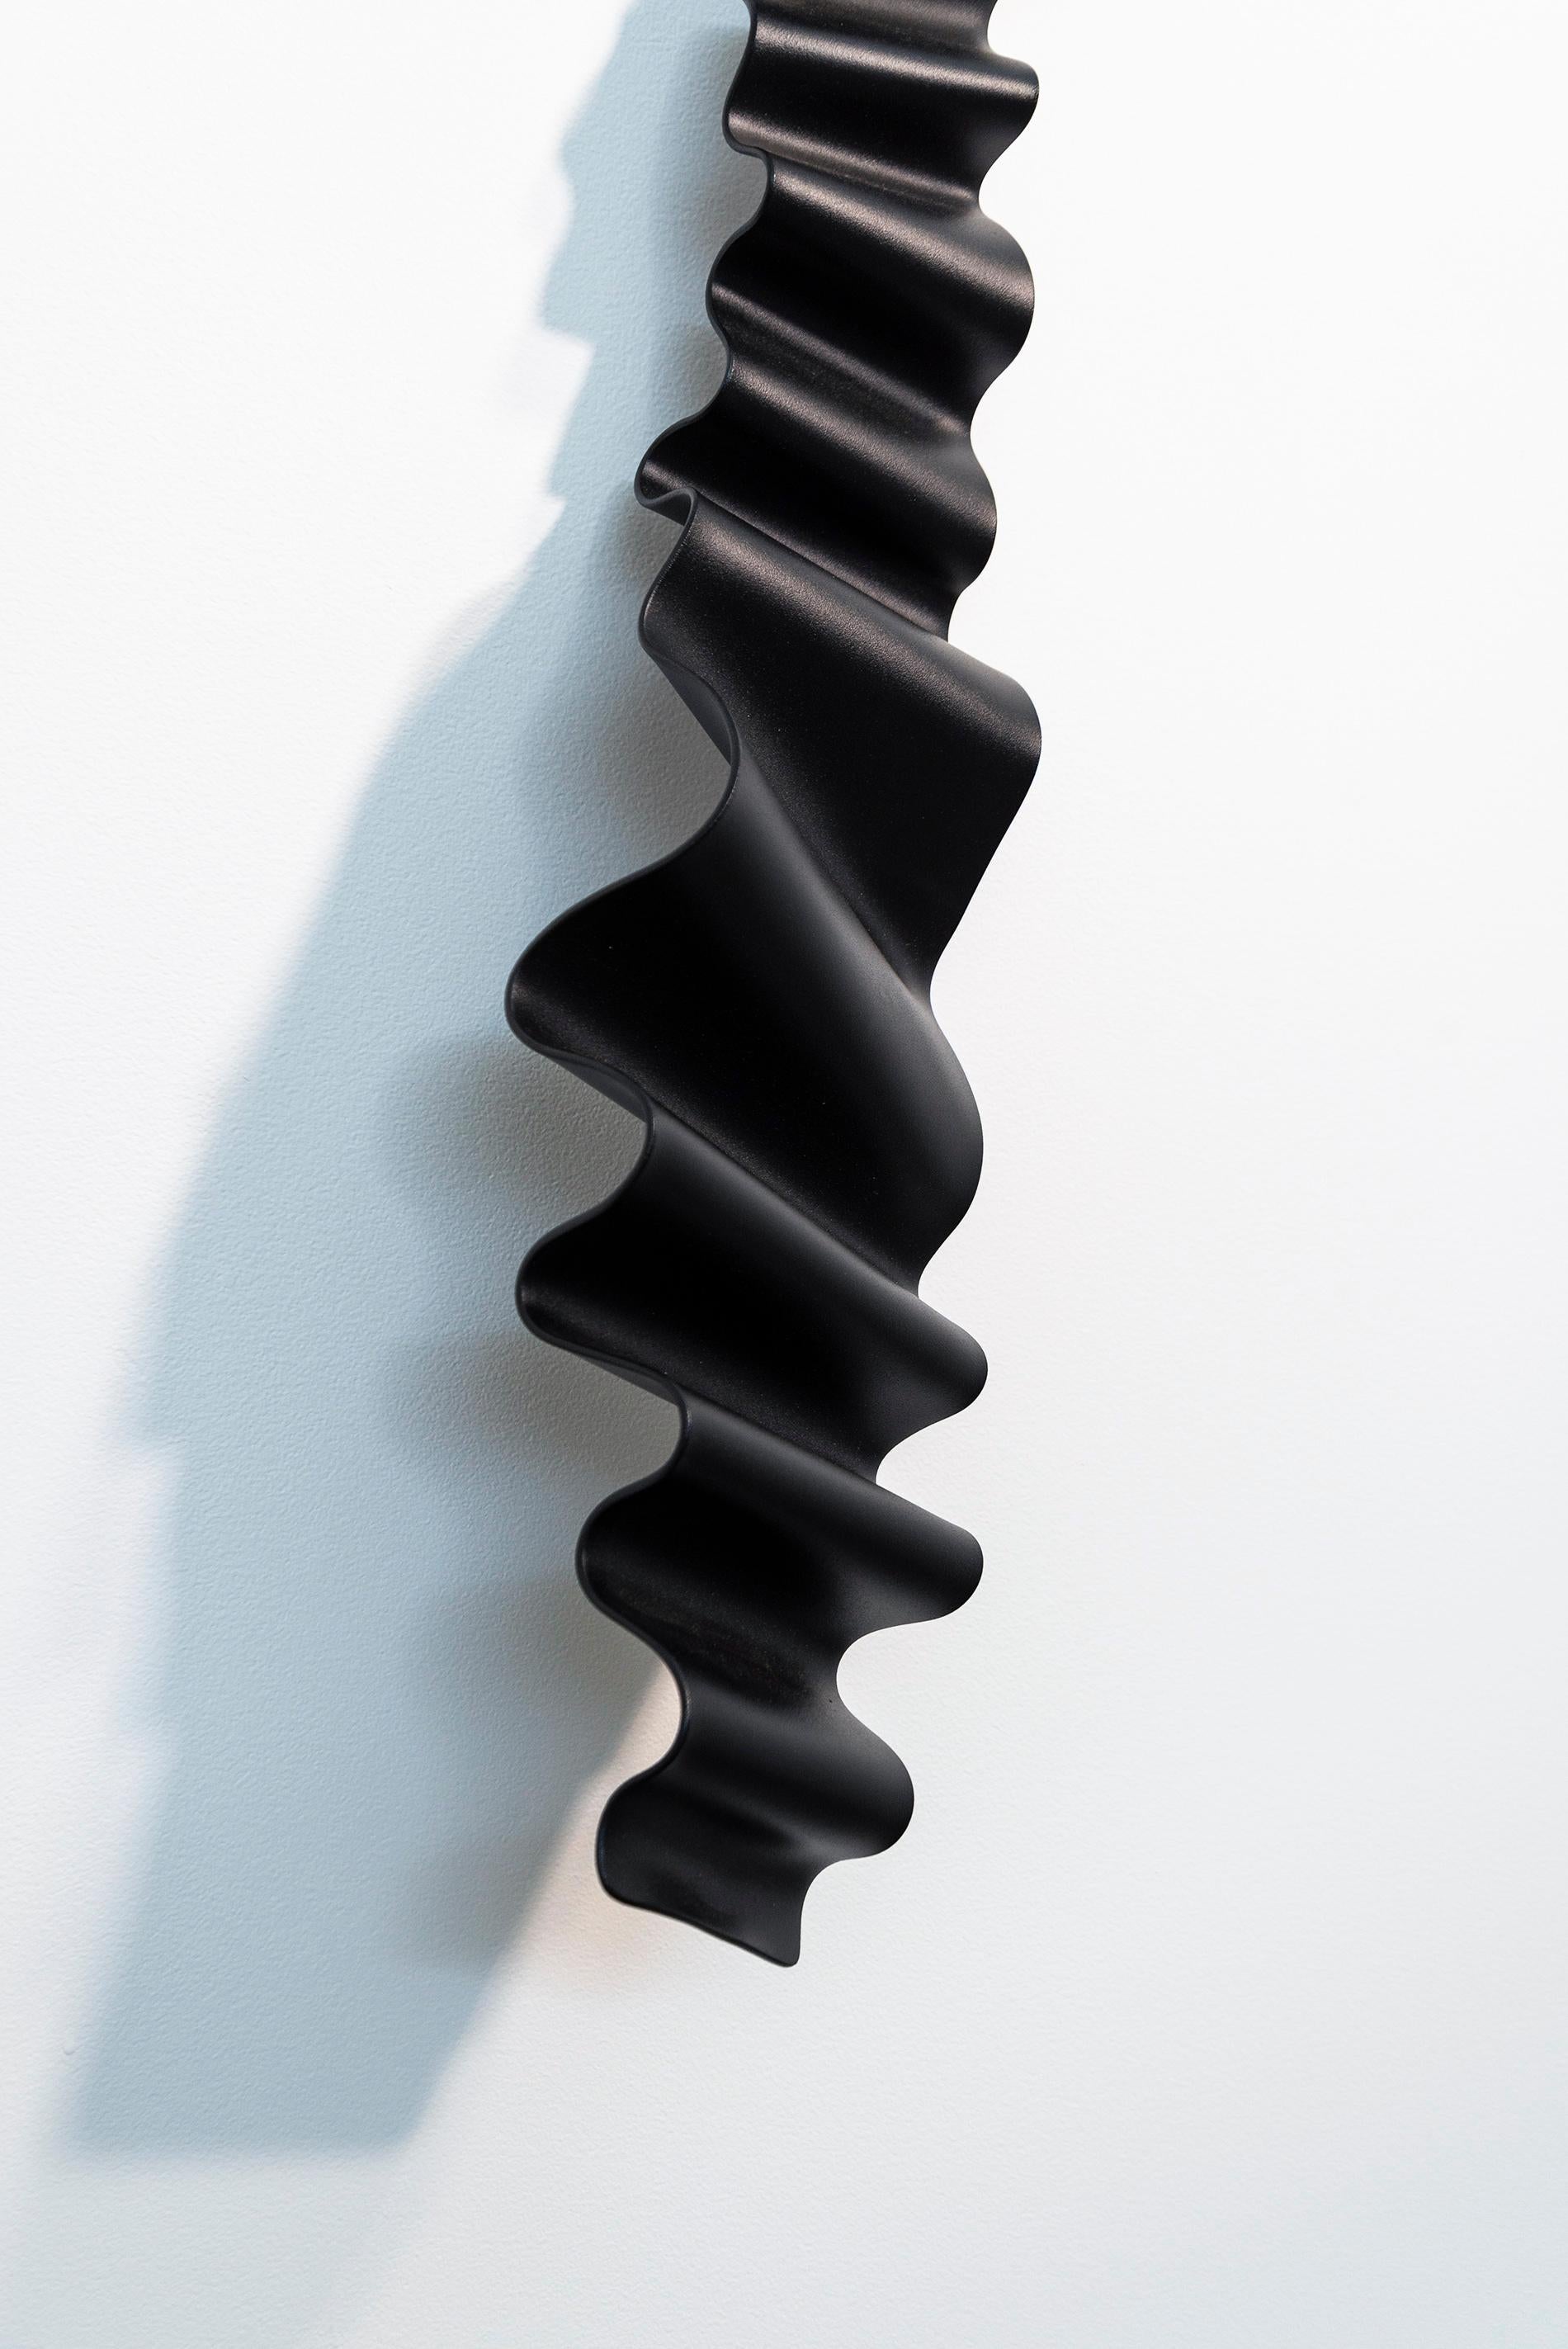 Sword of No Sword 1 - black, ribbon, powder coated steel, wall sculpture For Sale 2